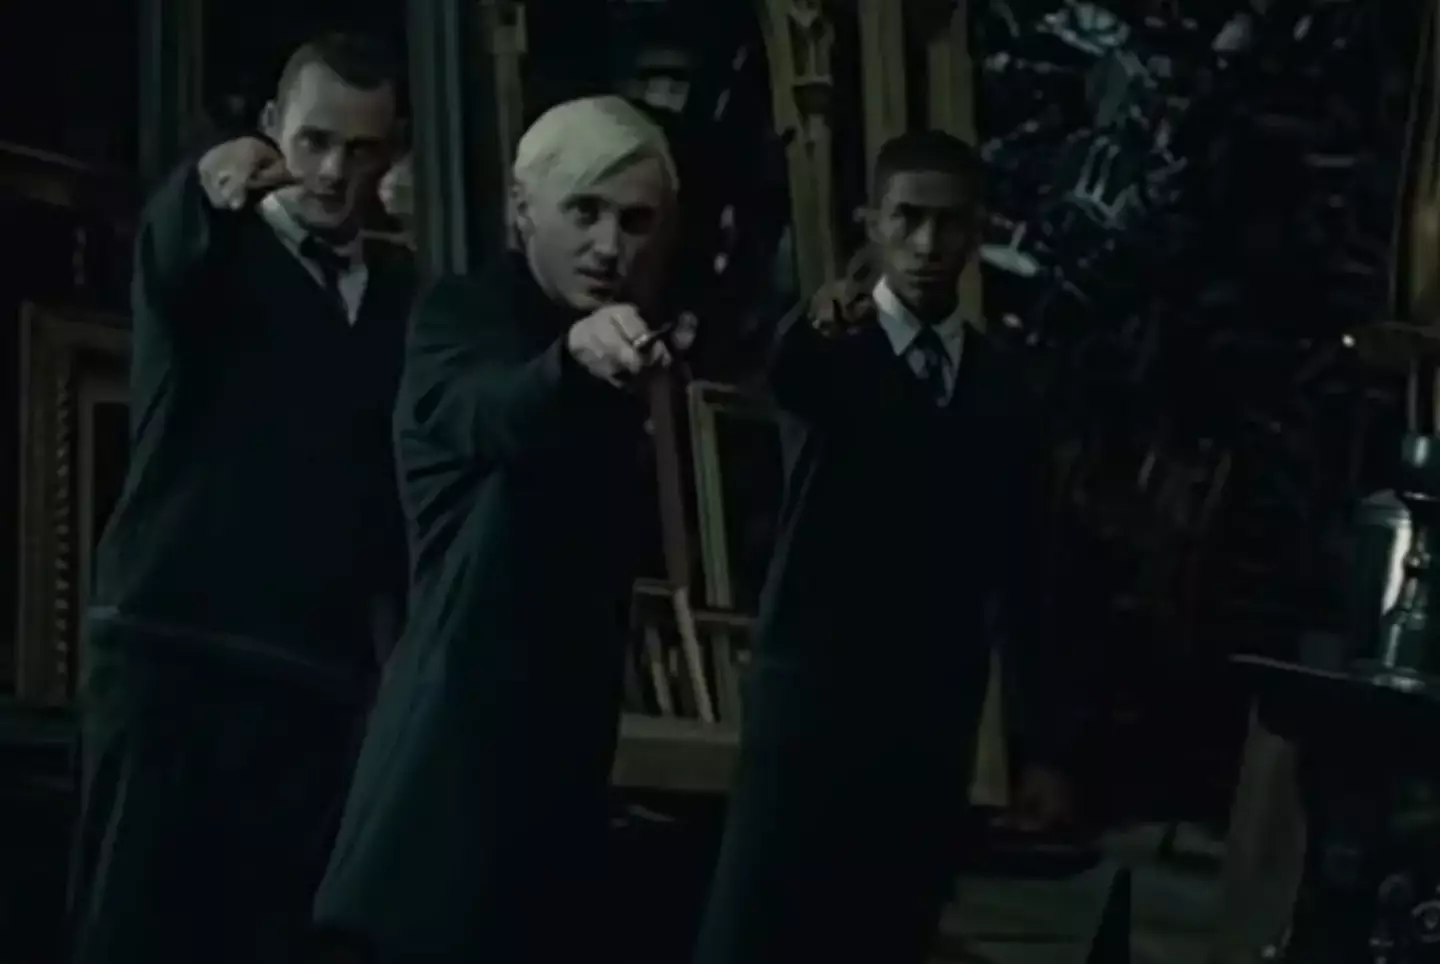 However the plot hole means we then see them acting as back up next to Malfoy.